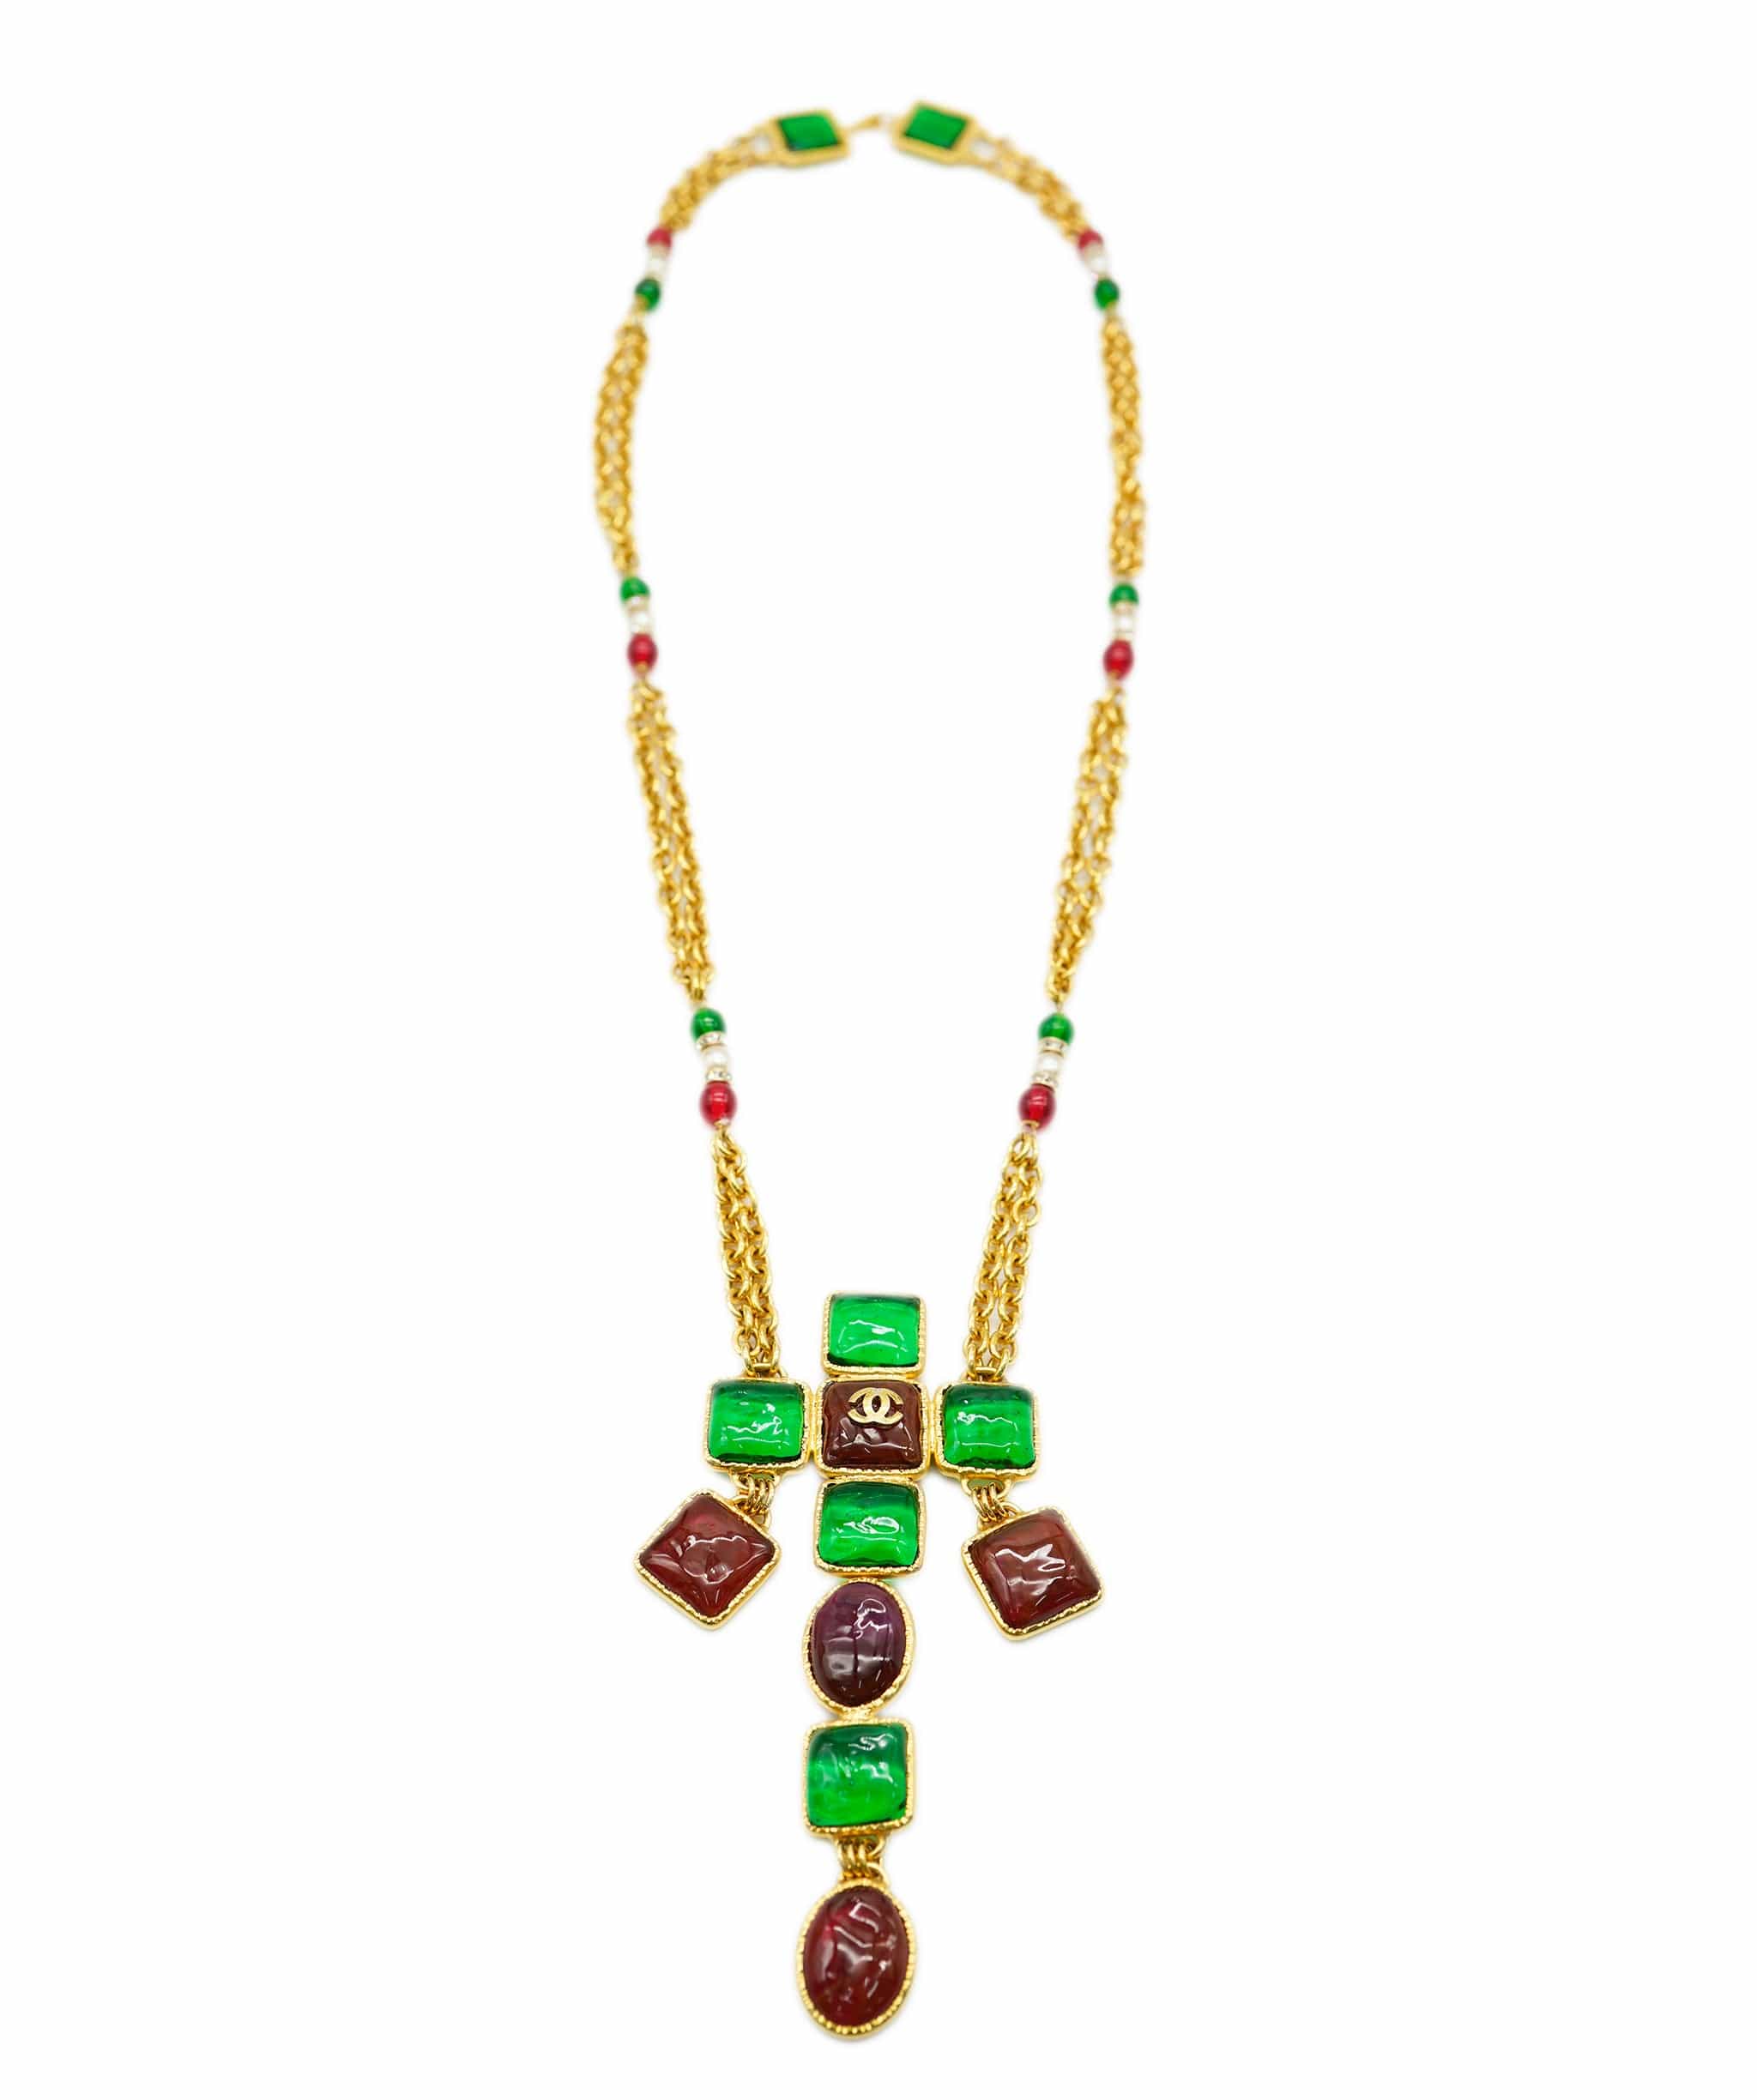 Chanel Chanel Red Green Gripoix Cross Necklace ASL4521 -Found in NYC Apartment